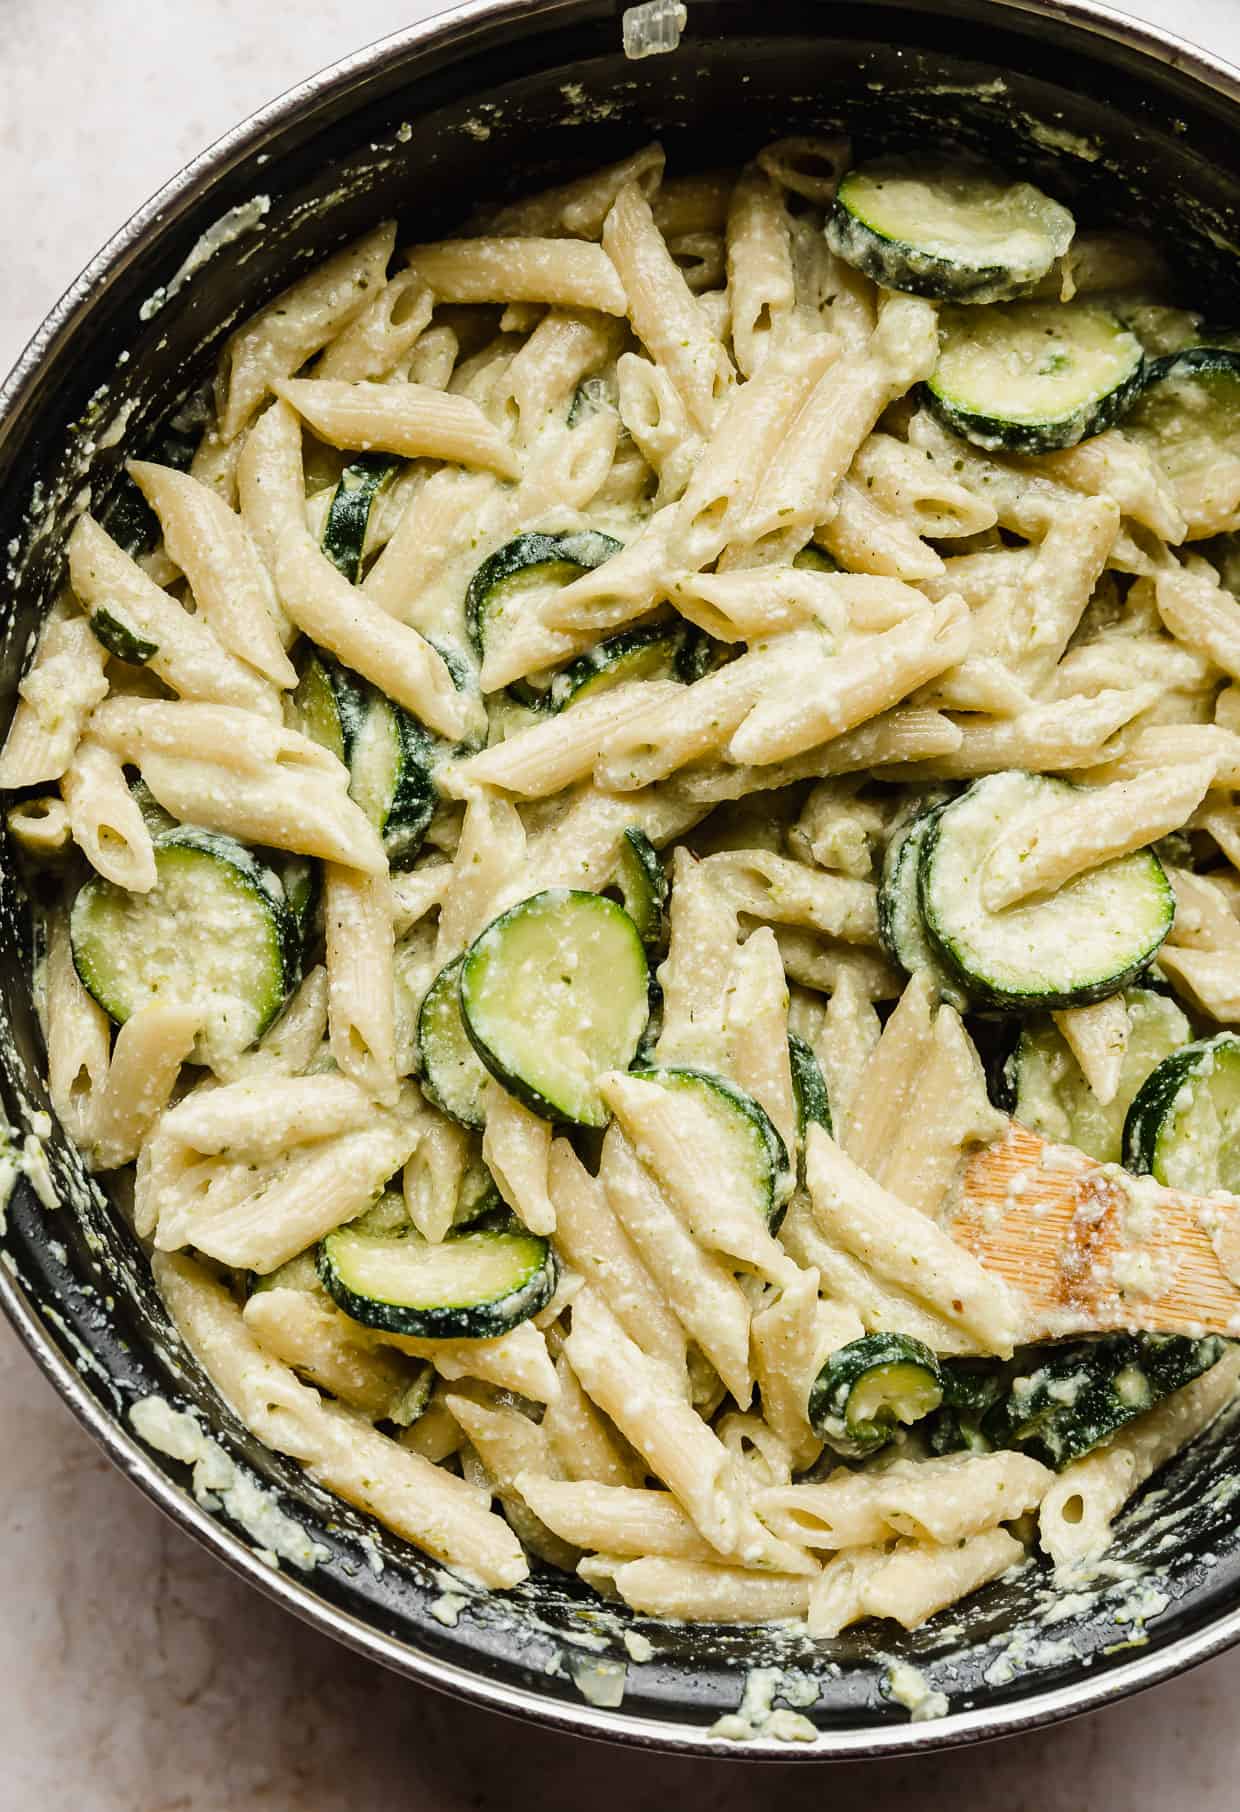 Pasta with Zucchini and Ricotta mixed together in a black pot.